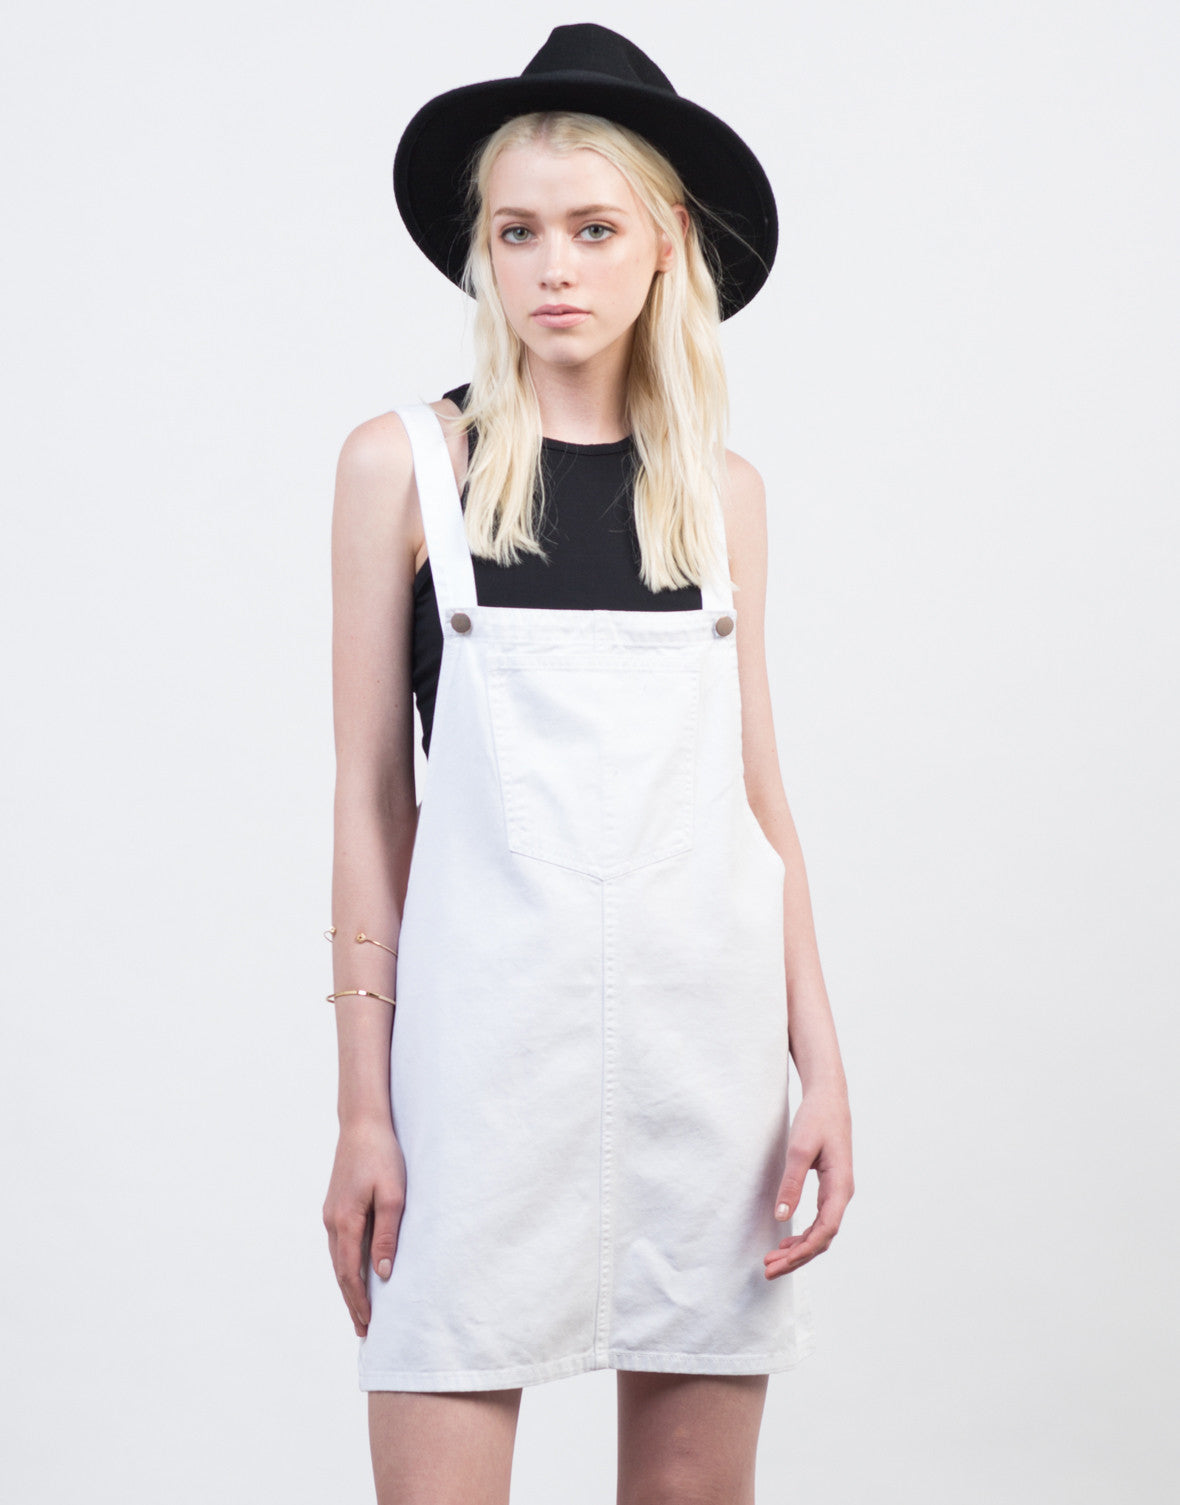 white jean overall dress